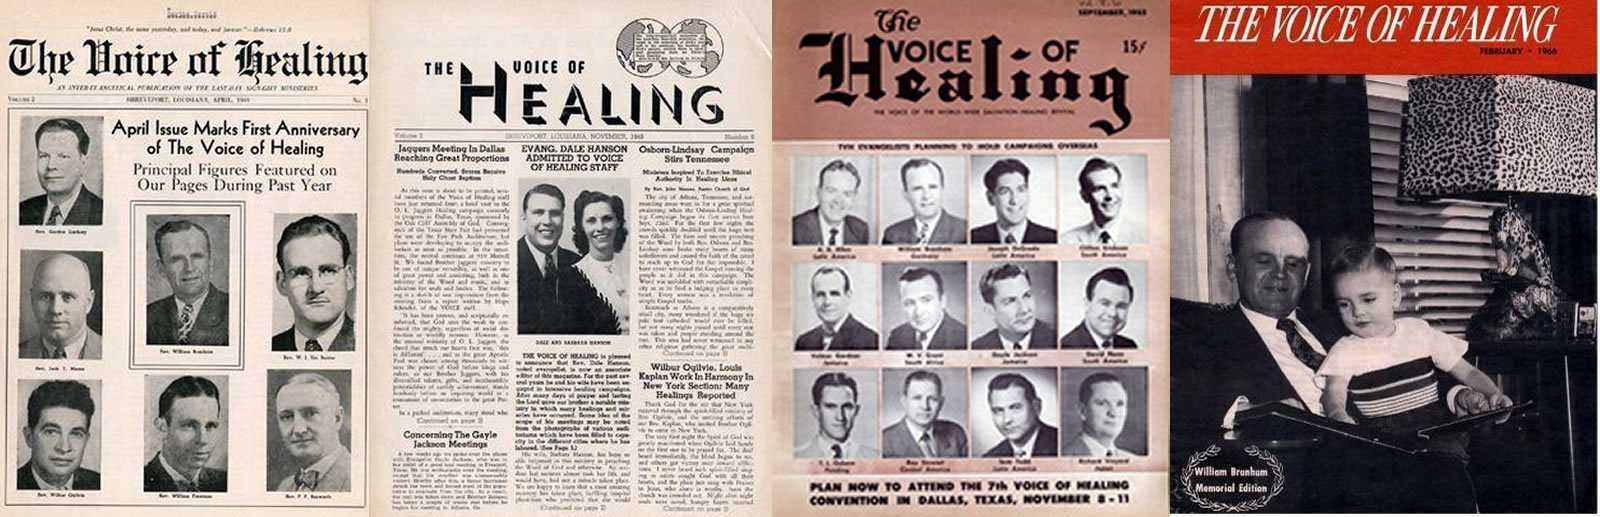 The Voice of healing